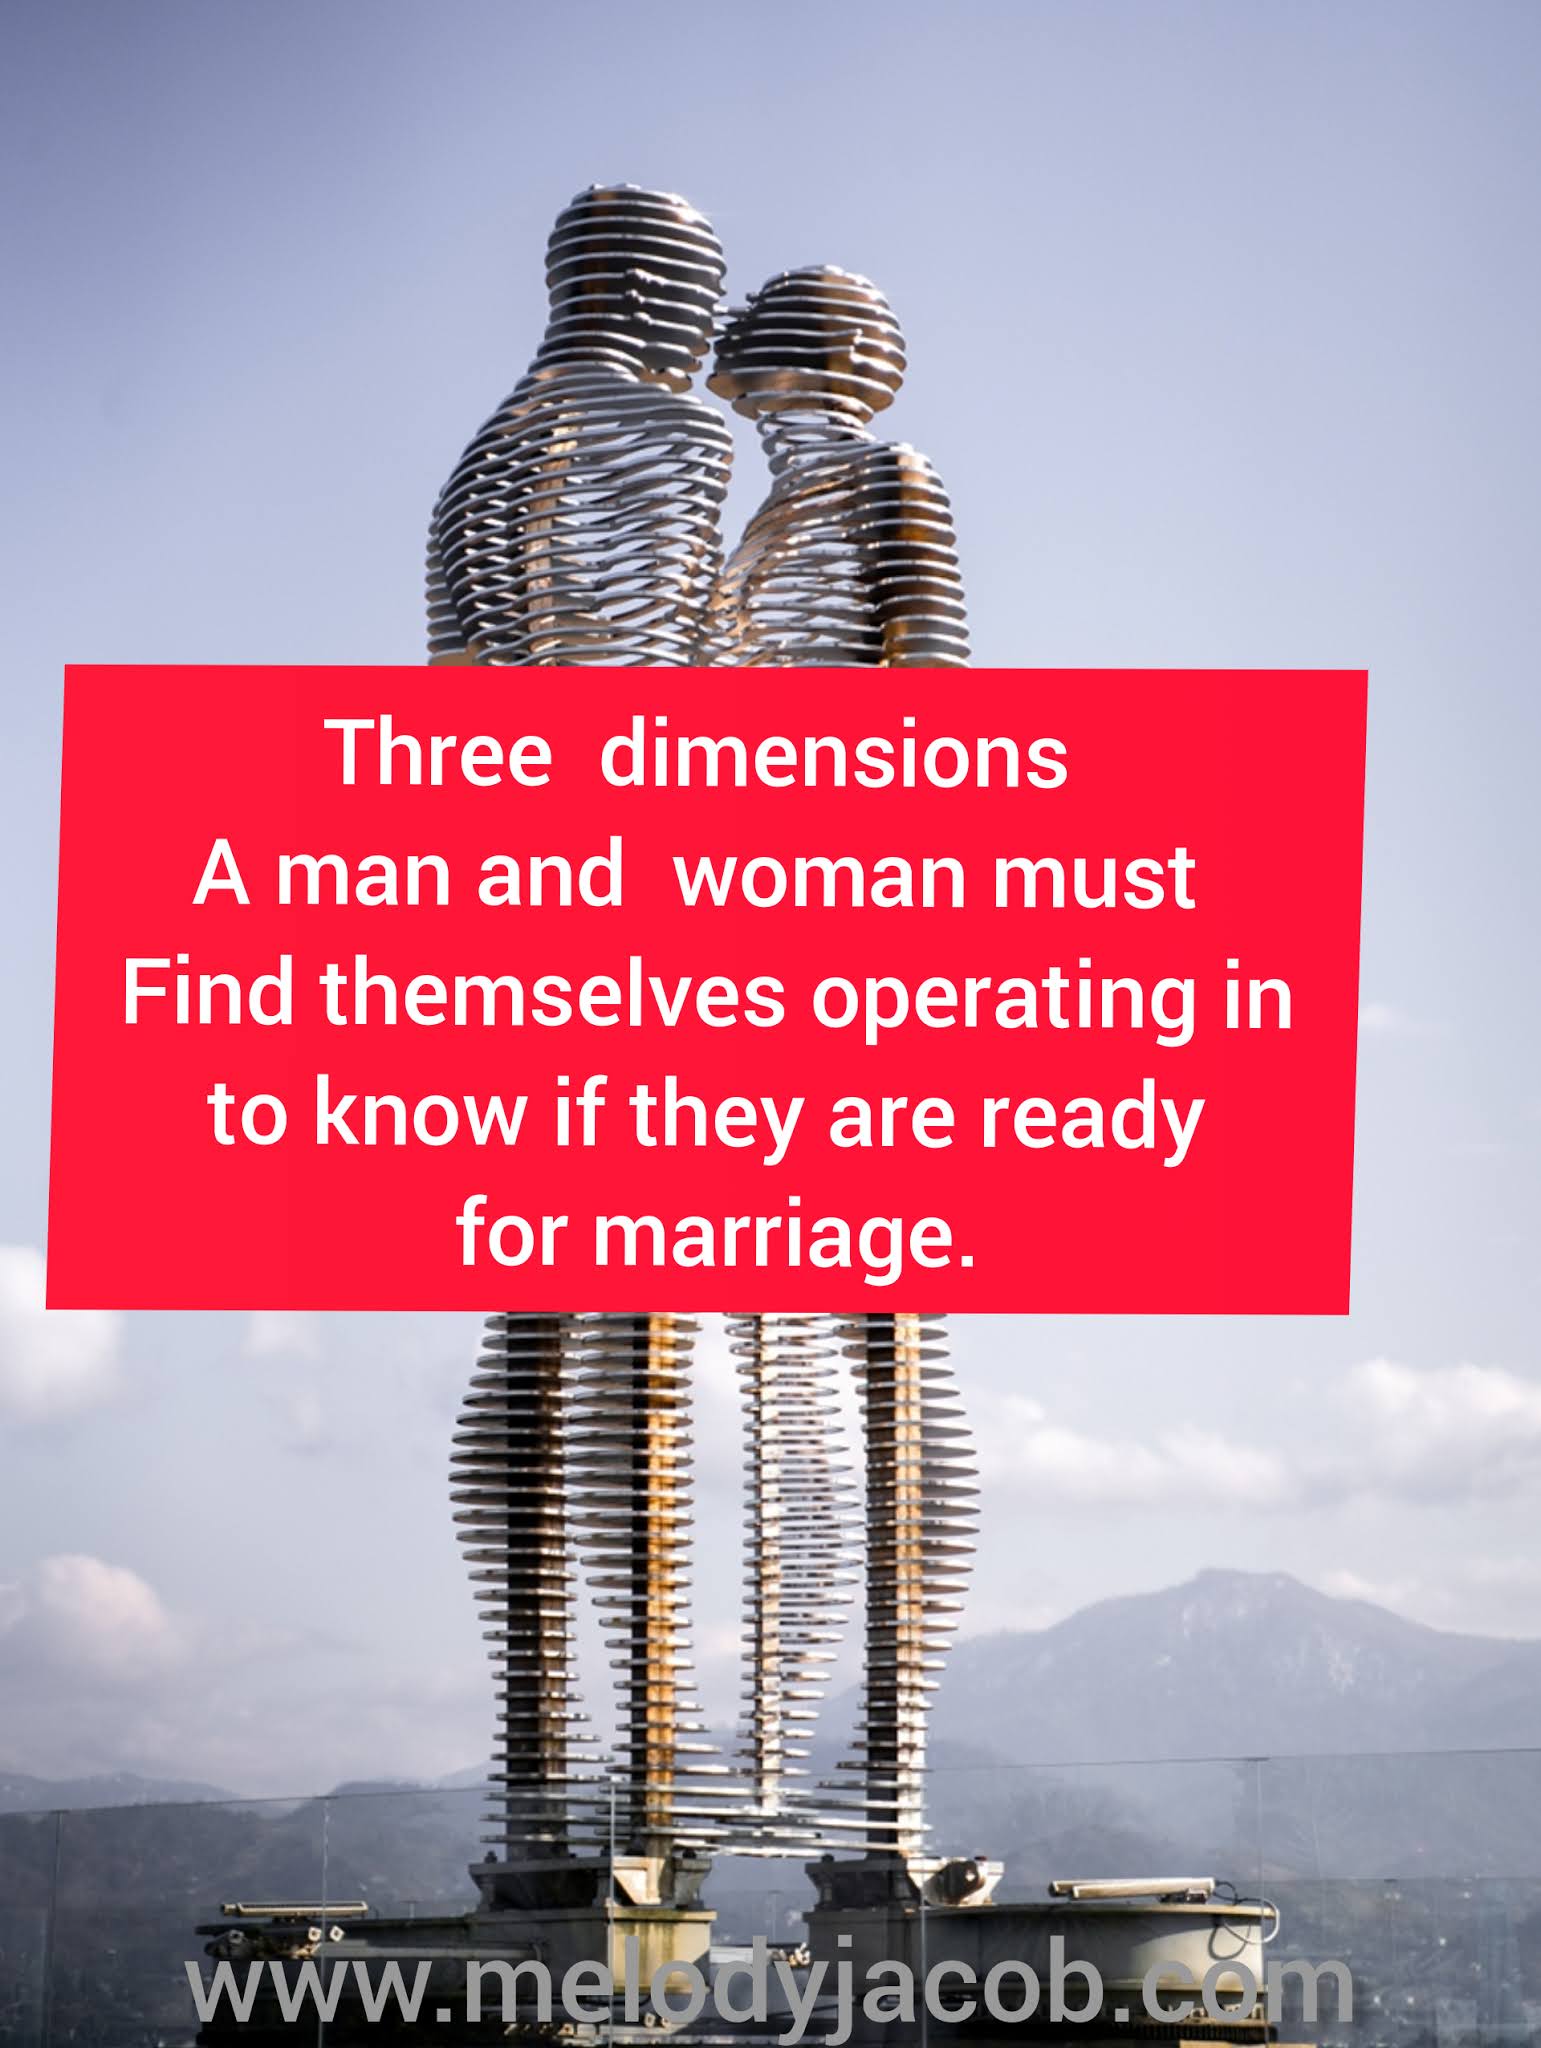 The three dimensions to a great marriage.